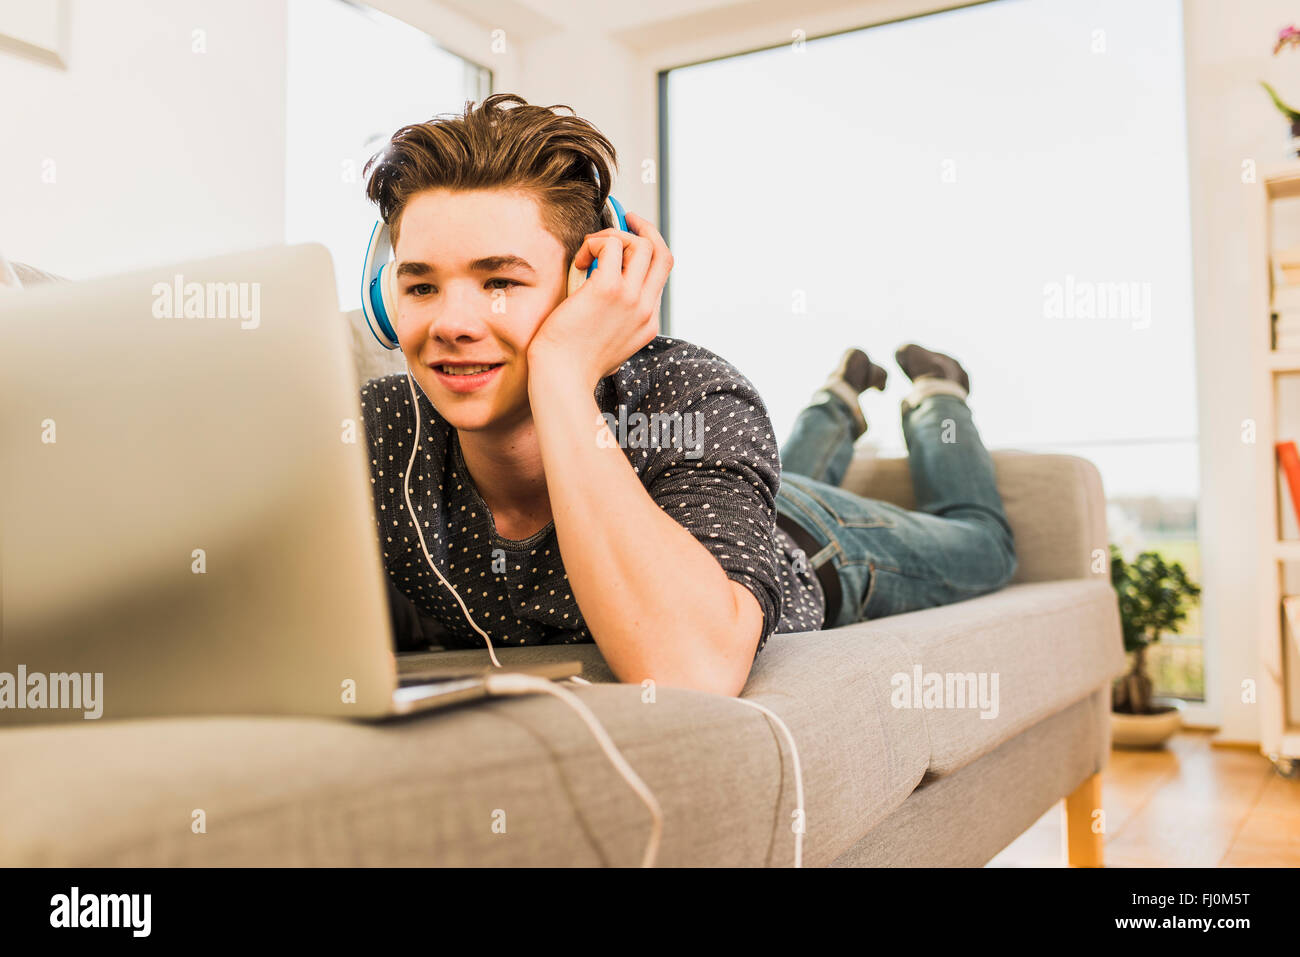 Young man lying on couch using laptop and headphones Stock Photo